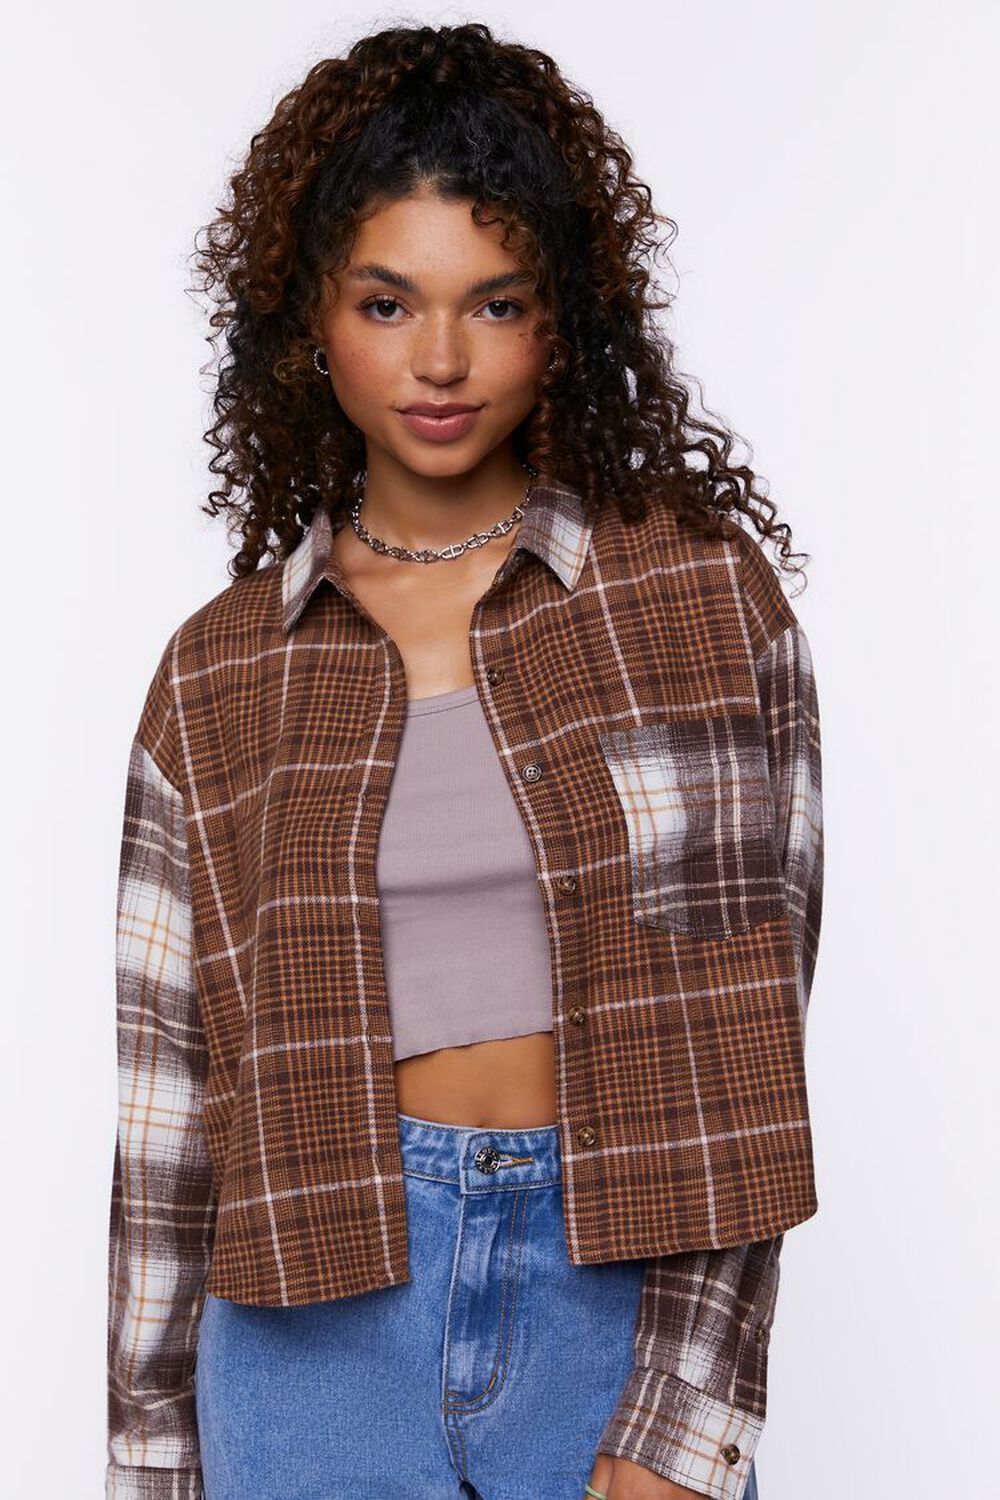 CAPPUCCINO Reworked Plaid Boxy Flannel Shirt, image 1